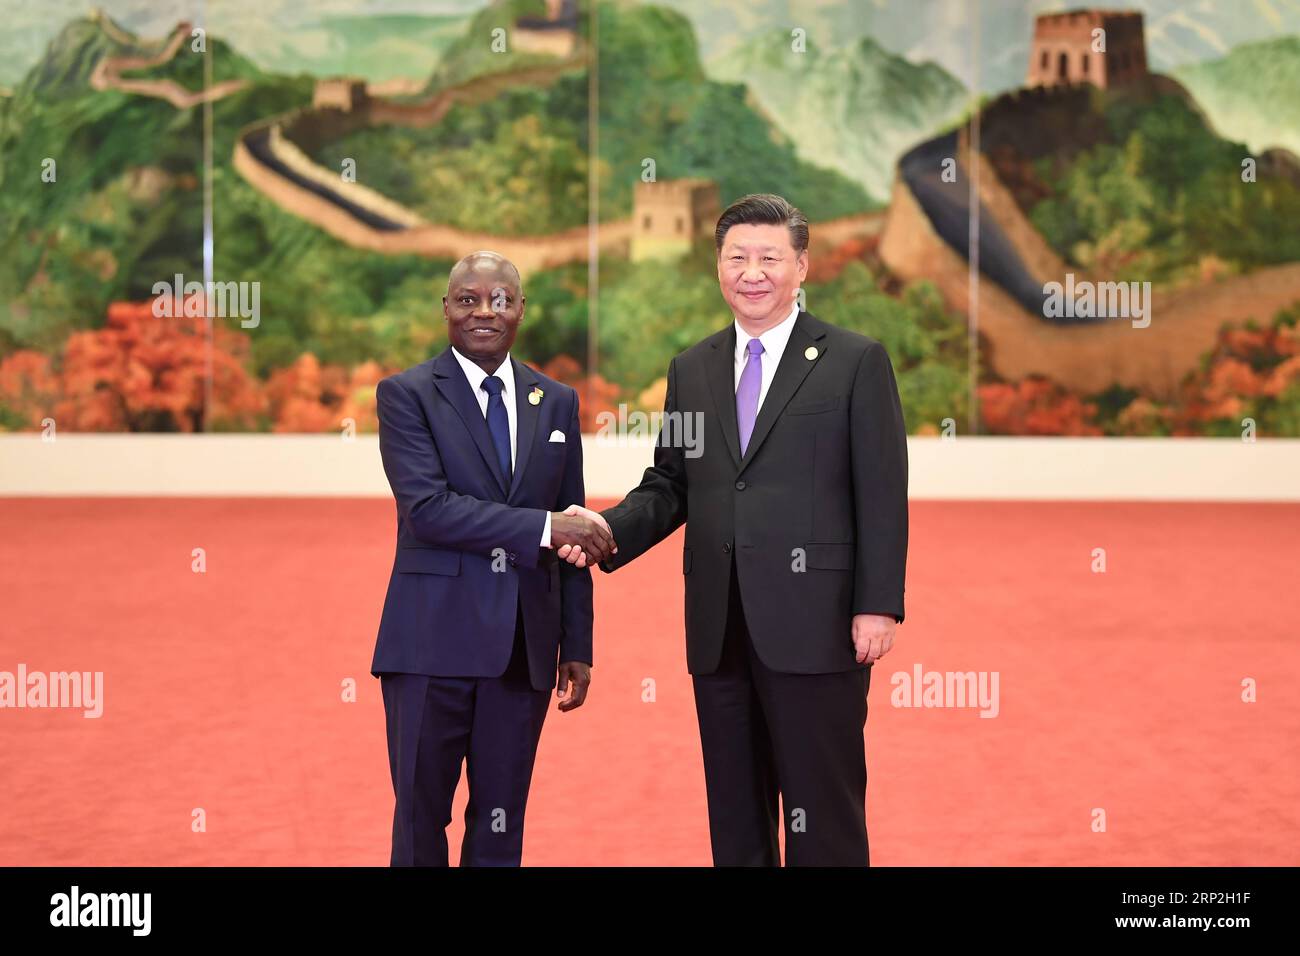 (180903) -- BEIJING, Sept. 3, 2018 -- Chinese President Xi Jinping (R) welcomes President of Guinea-Bissau Jose Mario Vaz, who is here to attend the 2018 Beijing Summit of the Forum on China-Africa Cooperation (FOCAC), at the Great Hall of the People in Beijing, capital of China, Sept. 3, 2018. )(mcg) CHINA-BEIJING-FOCAC-XI JINPING-WELCOME (CN) YanxYan PUBLICATIONxNOTxINxCHN Stock Photo